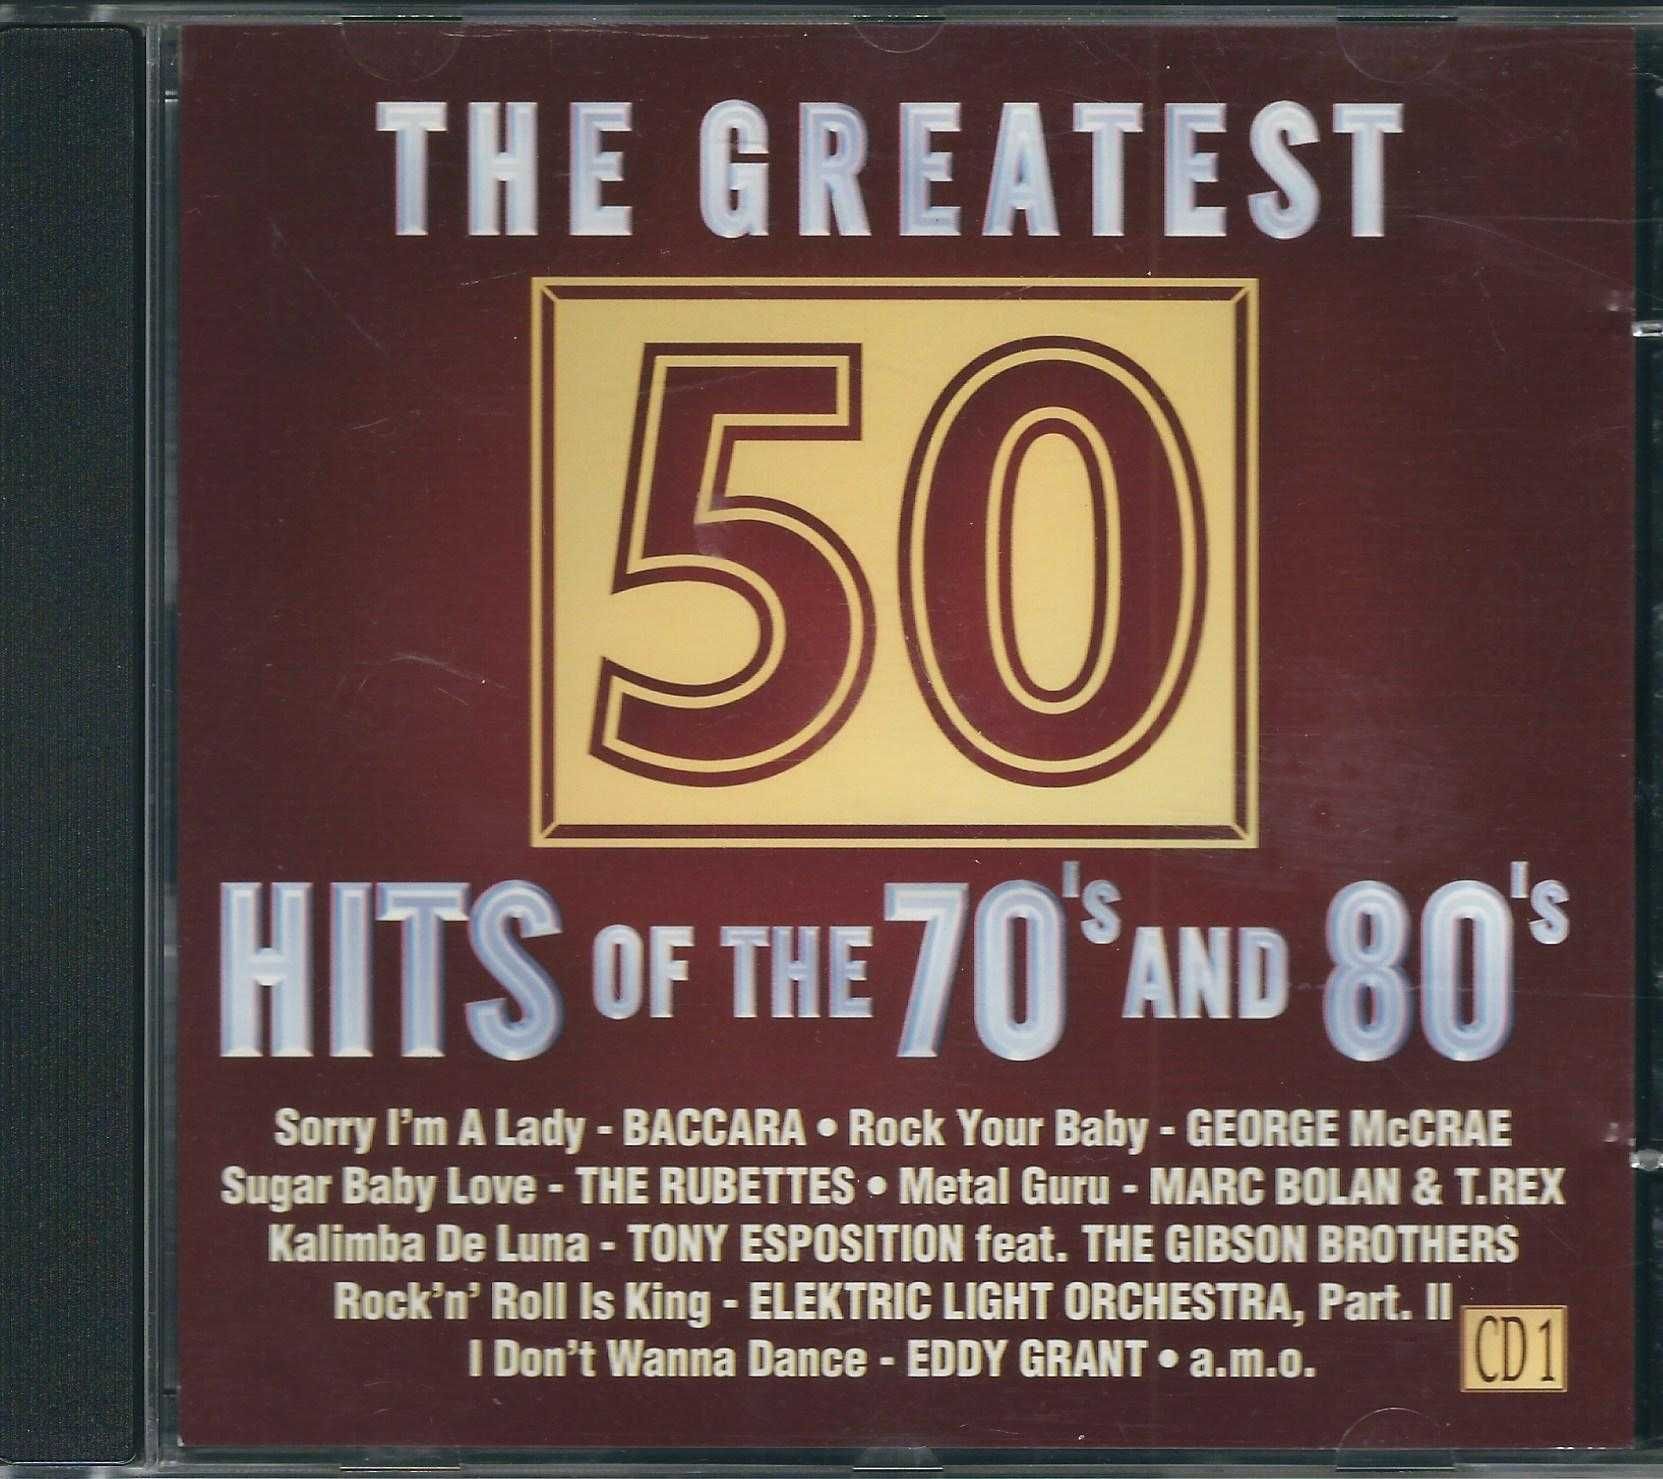 CD VA - The 50 Greatest Hits Of The 70's And 80's  CD1 (2002) (Eurotre